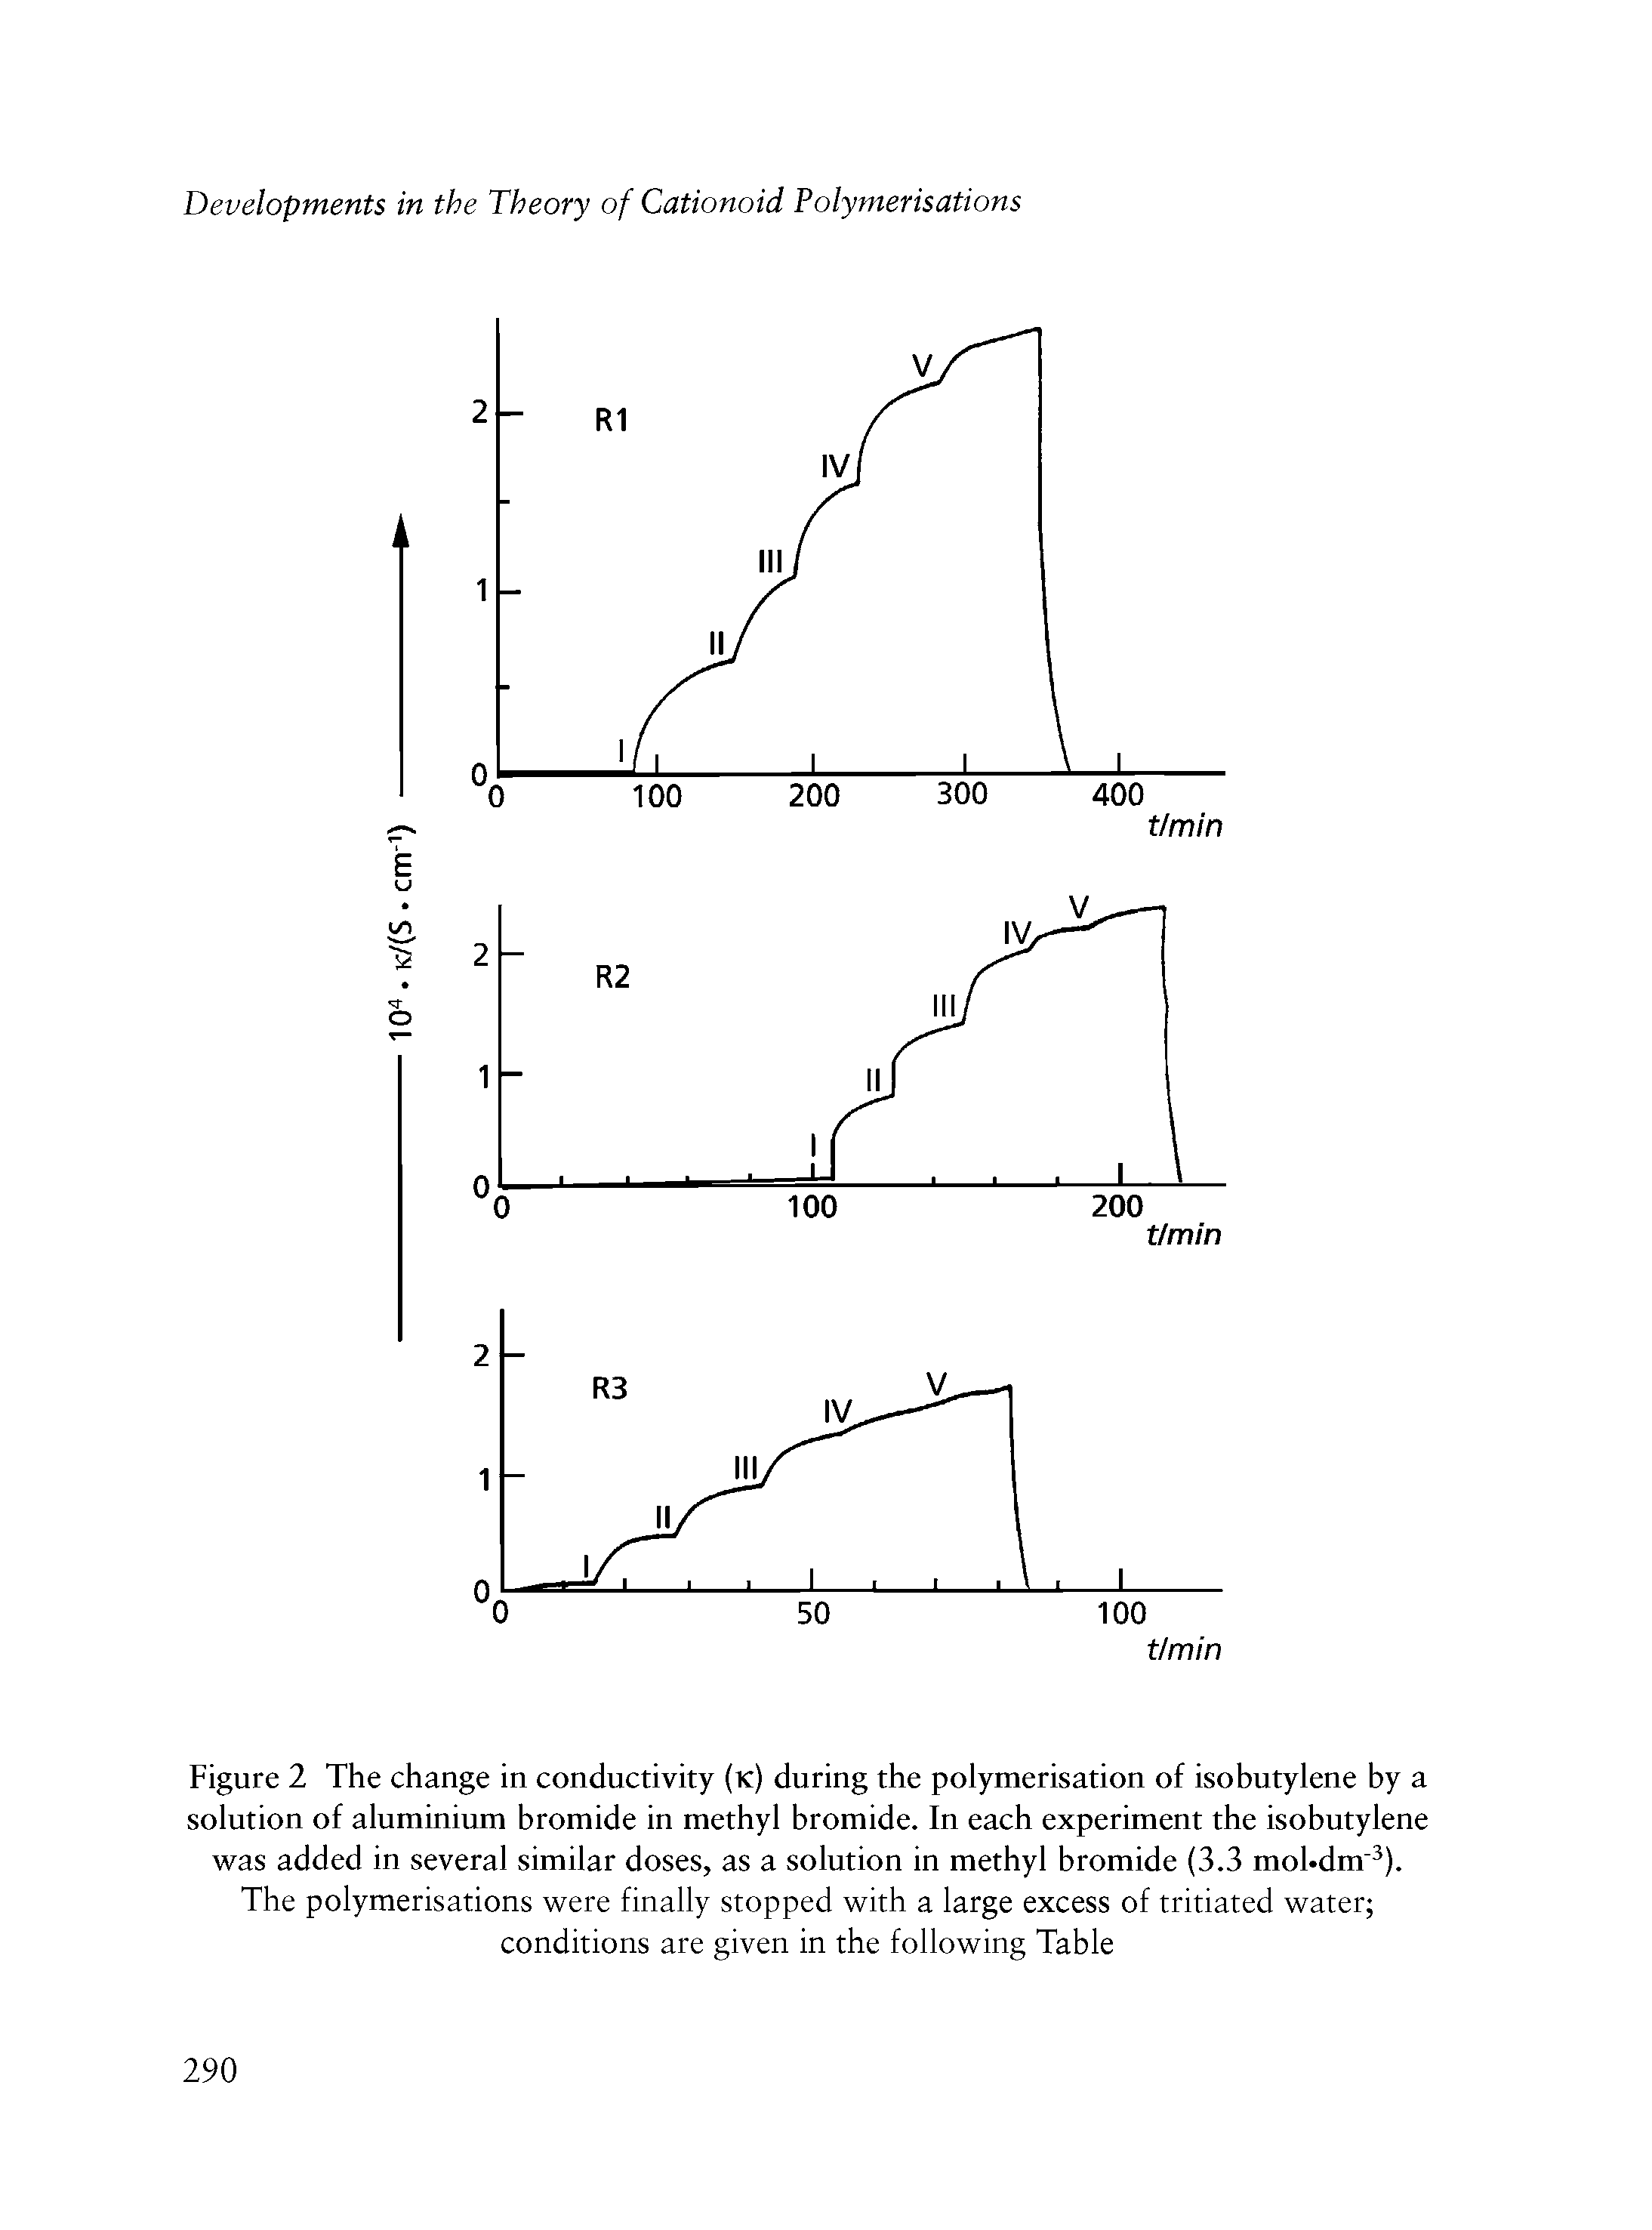 Figure 2 The change in conductivity (k) during the polymerisation of isobutylene by a solution of aluminium bromide in methyl bromide. In each experiment the isobutylene was added in several similar doses, as a solution in methyl bromide (3.3 mohdm 3). The polymerisations were finally stopped with a large excess of tritiated water conditions are given in the following Table...